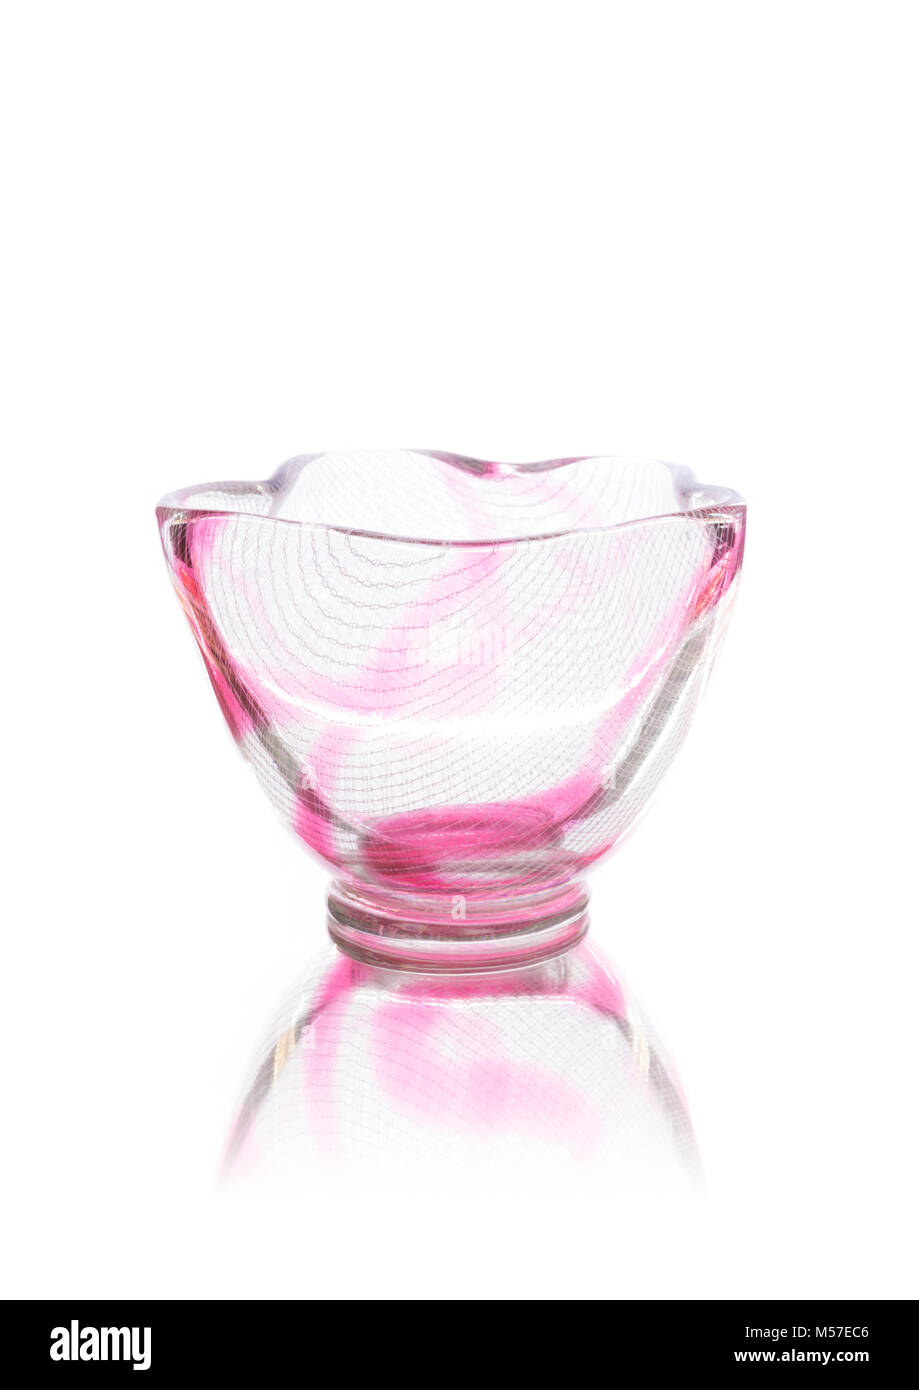 Antique glass bowl isolated on white background Stock Photo